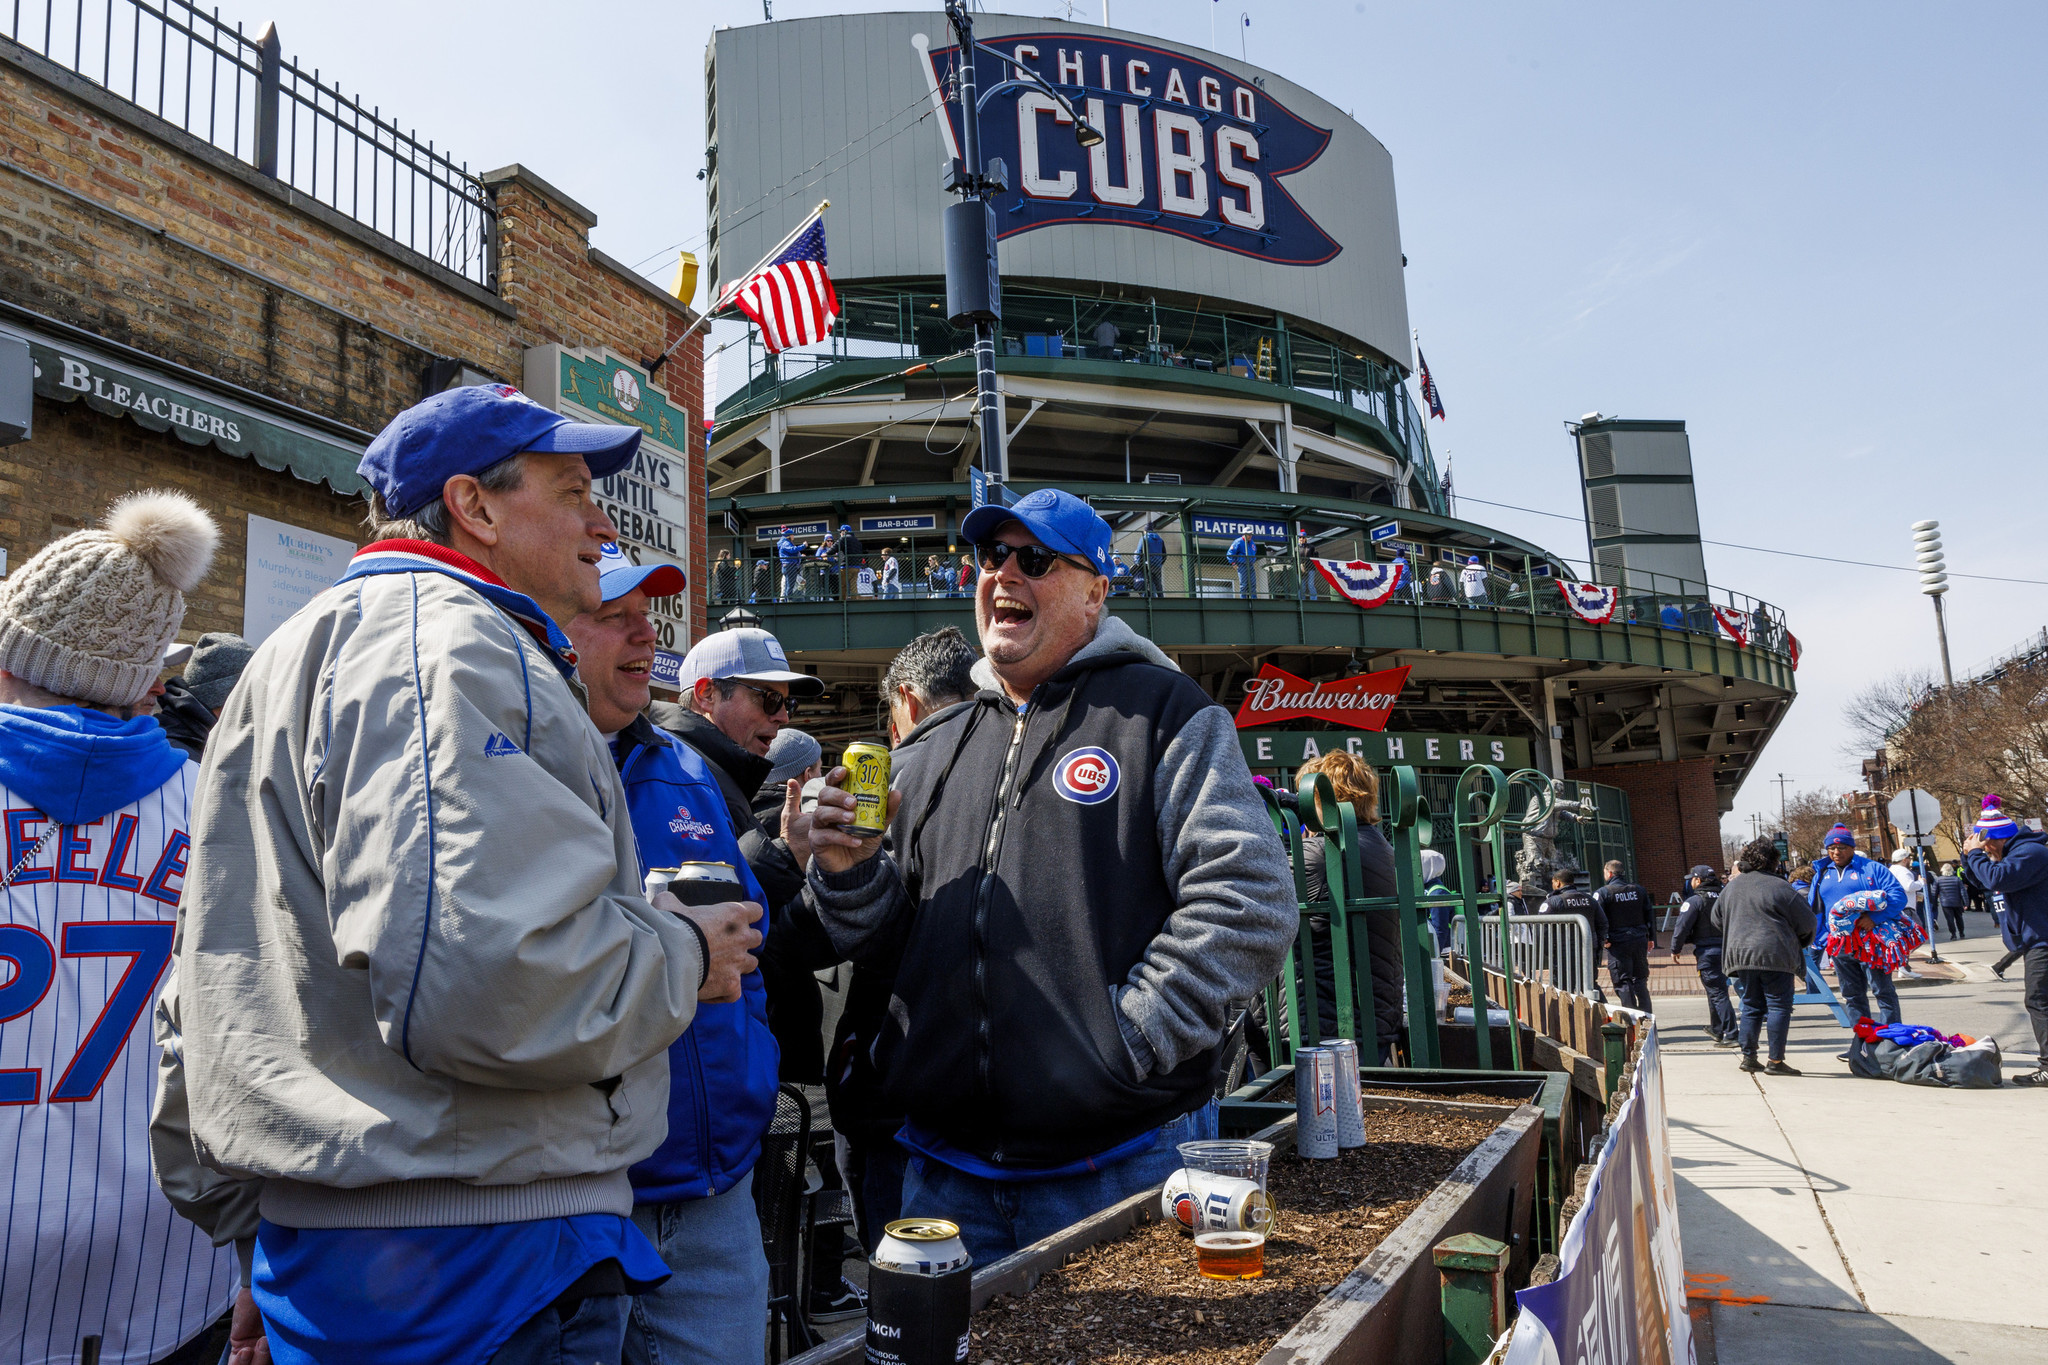 Chicago Tribune - Fans gather near the Wrigley Field marquee on